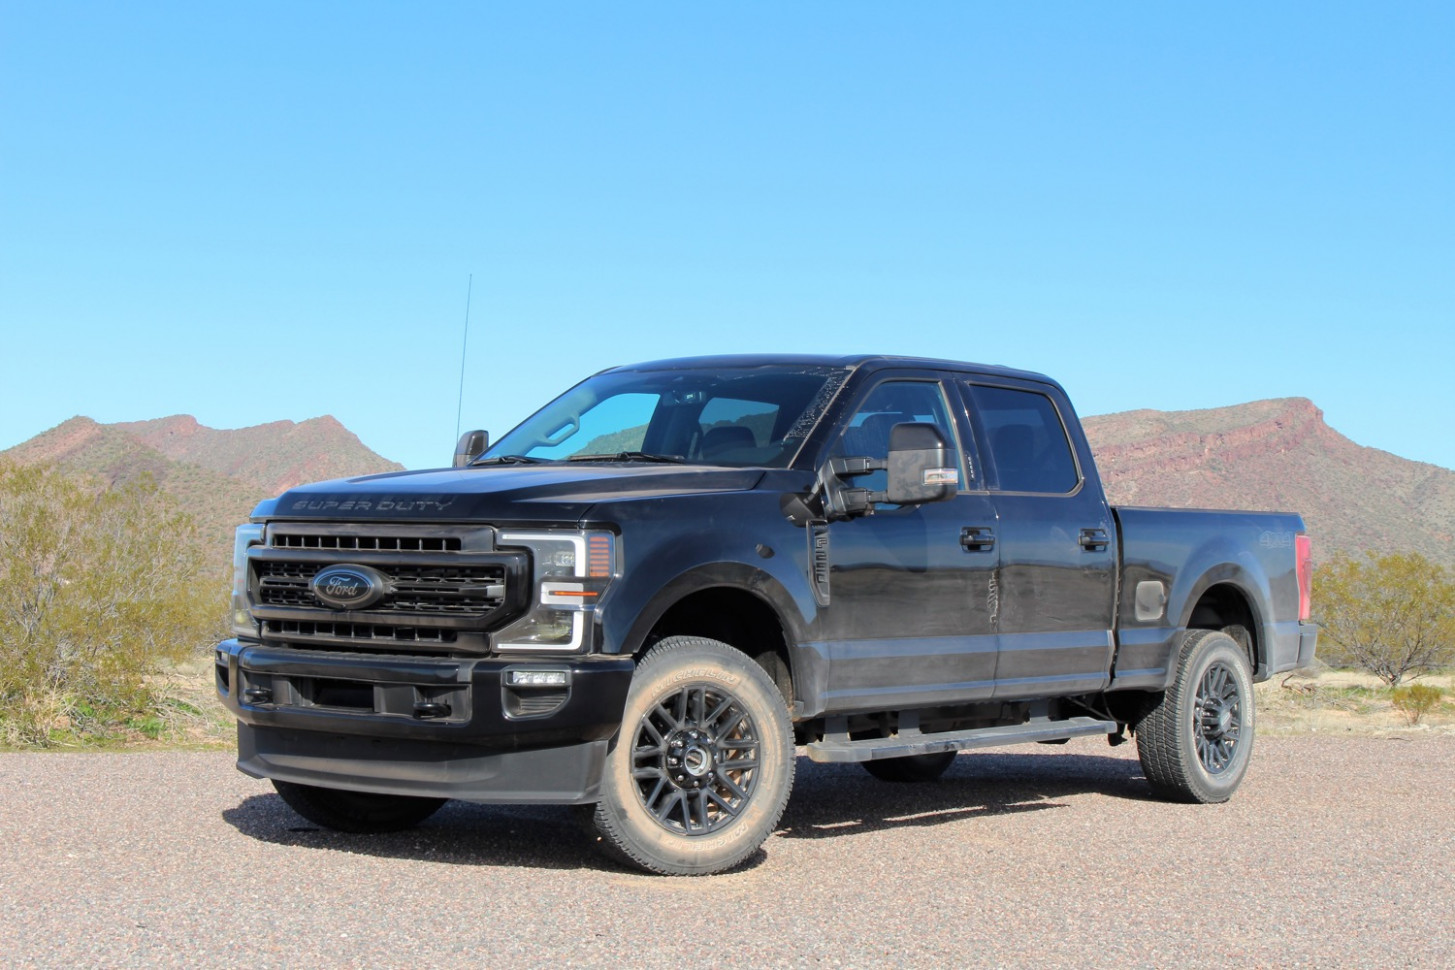 Redesign and Review 2022 Ford F250 Diesel Rumored Announced